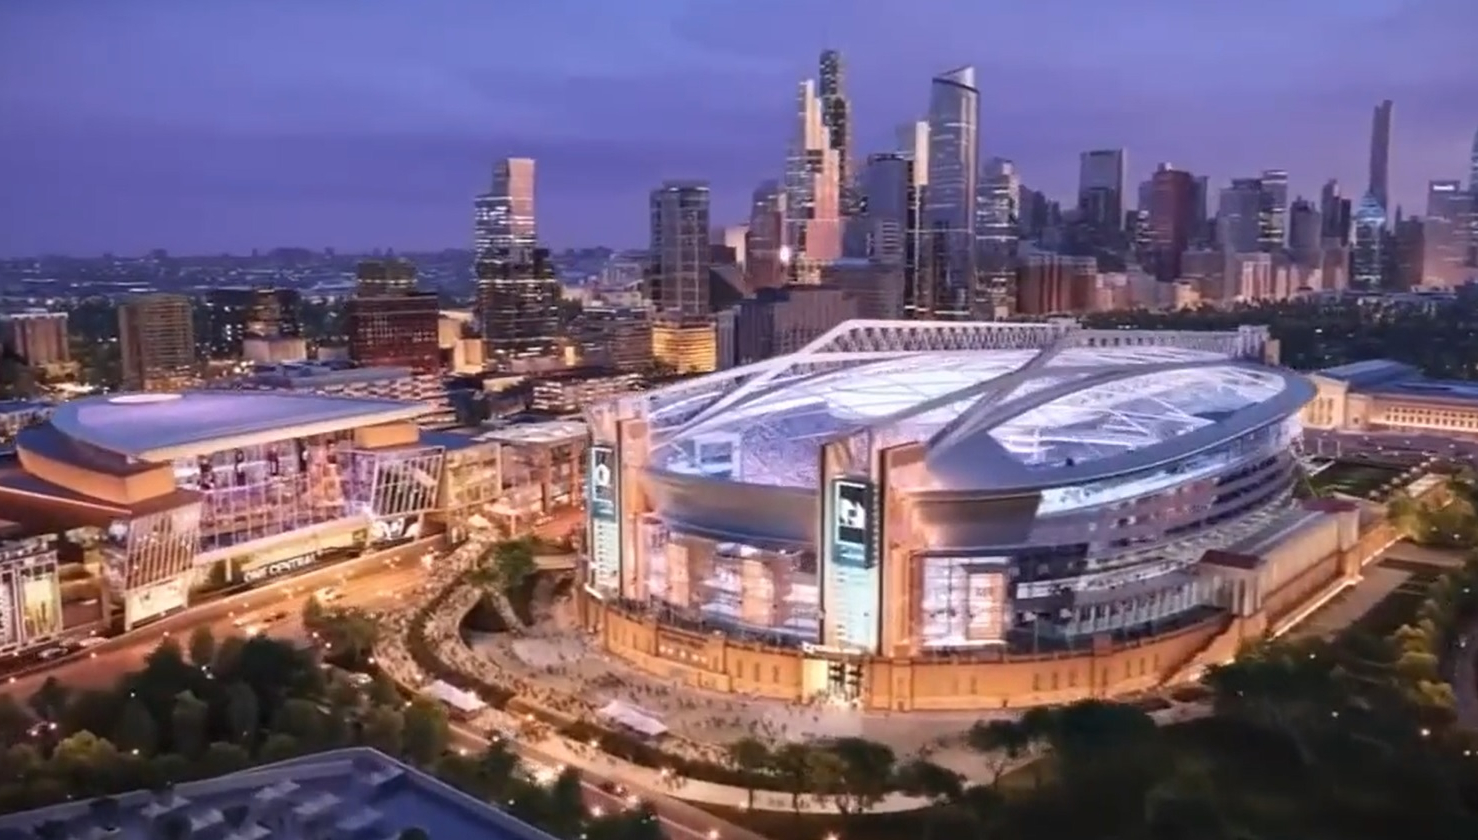 Will a $2.2B renovation keep the Bears downtown?